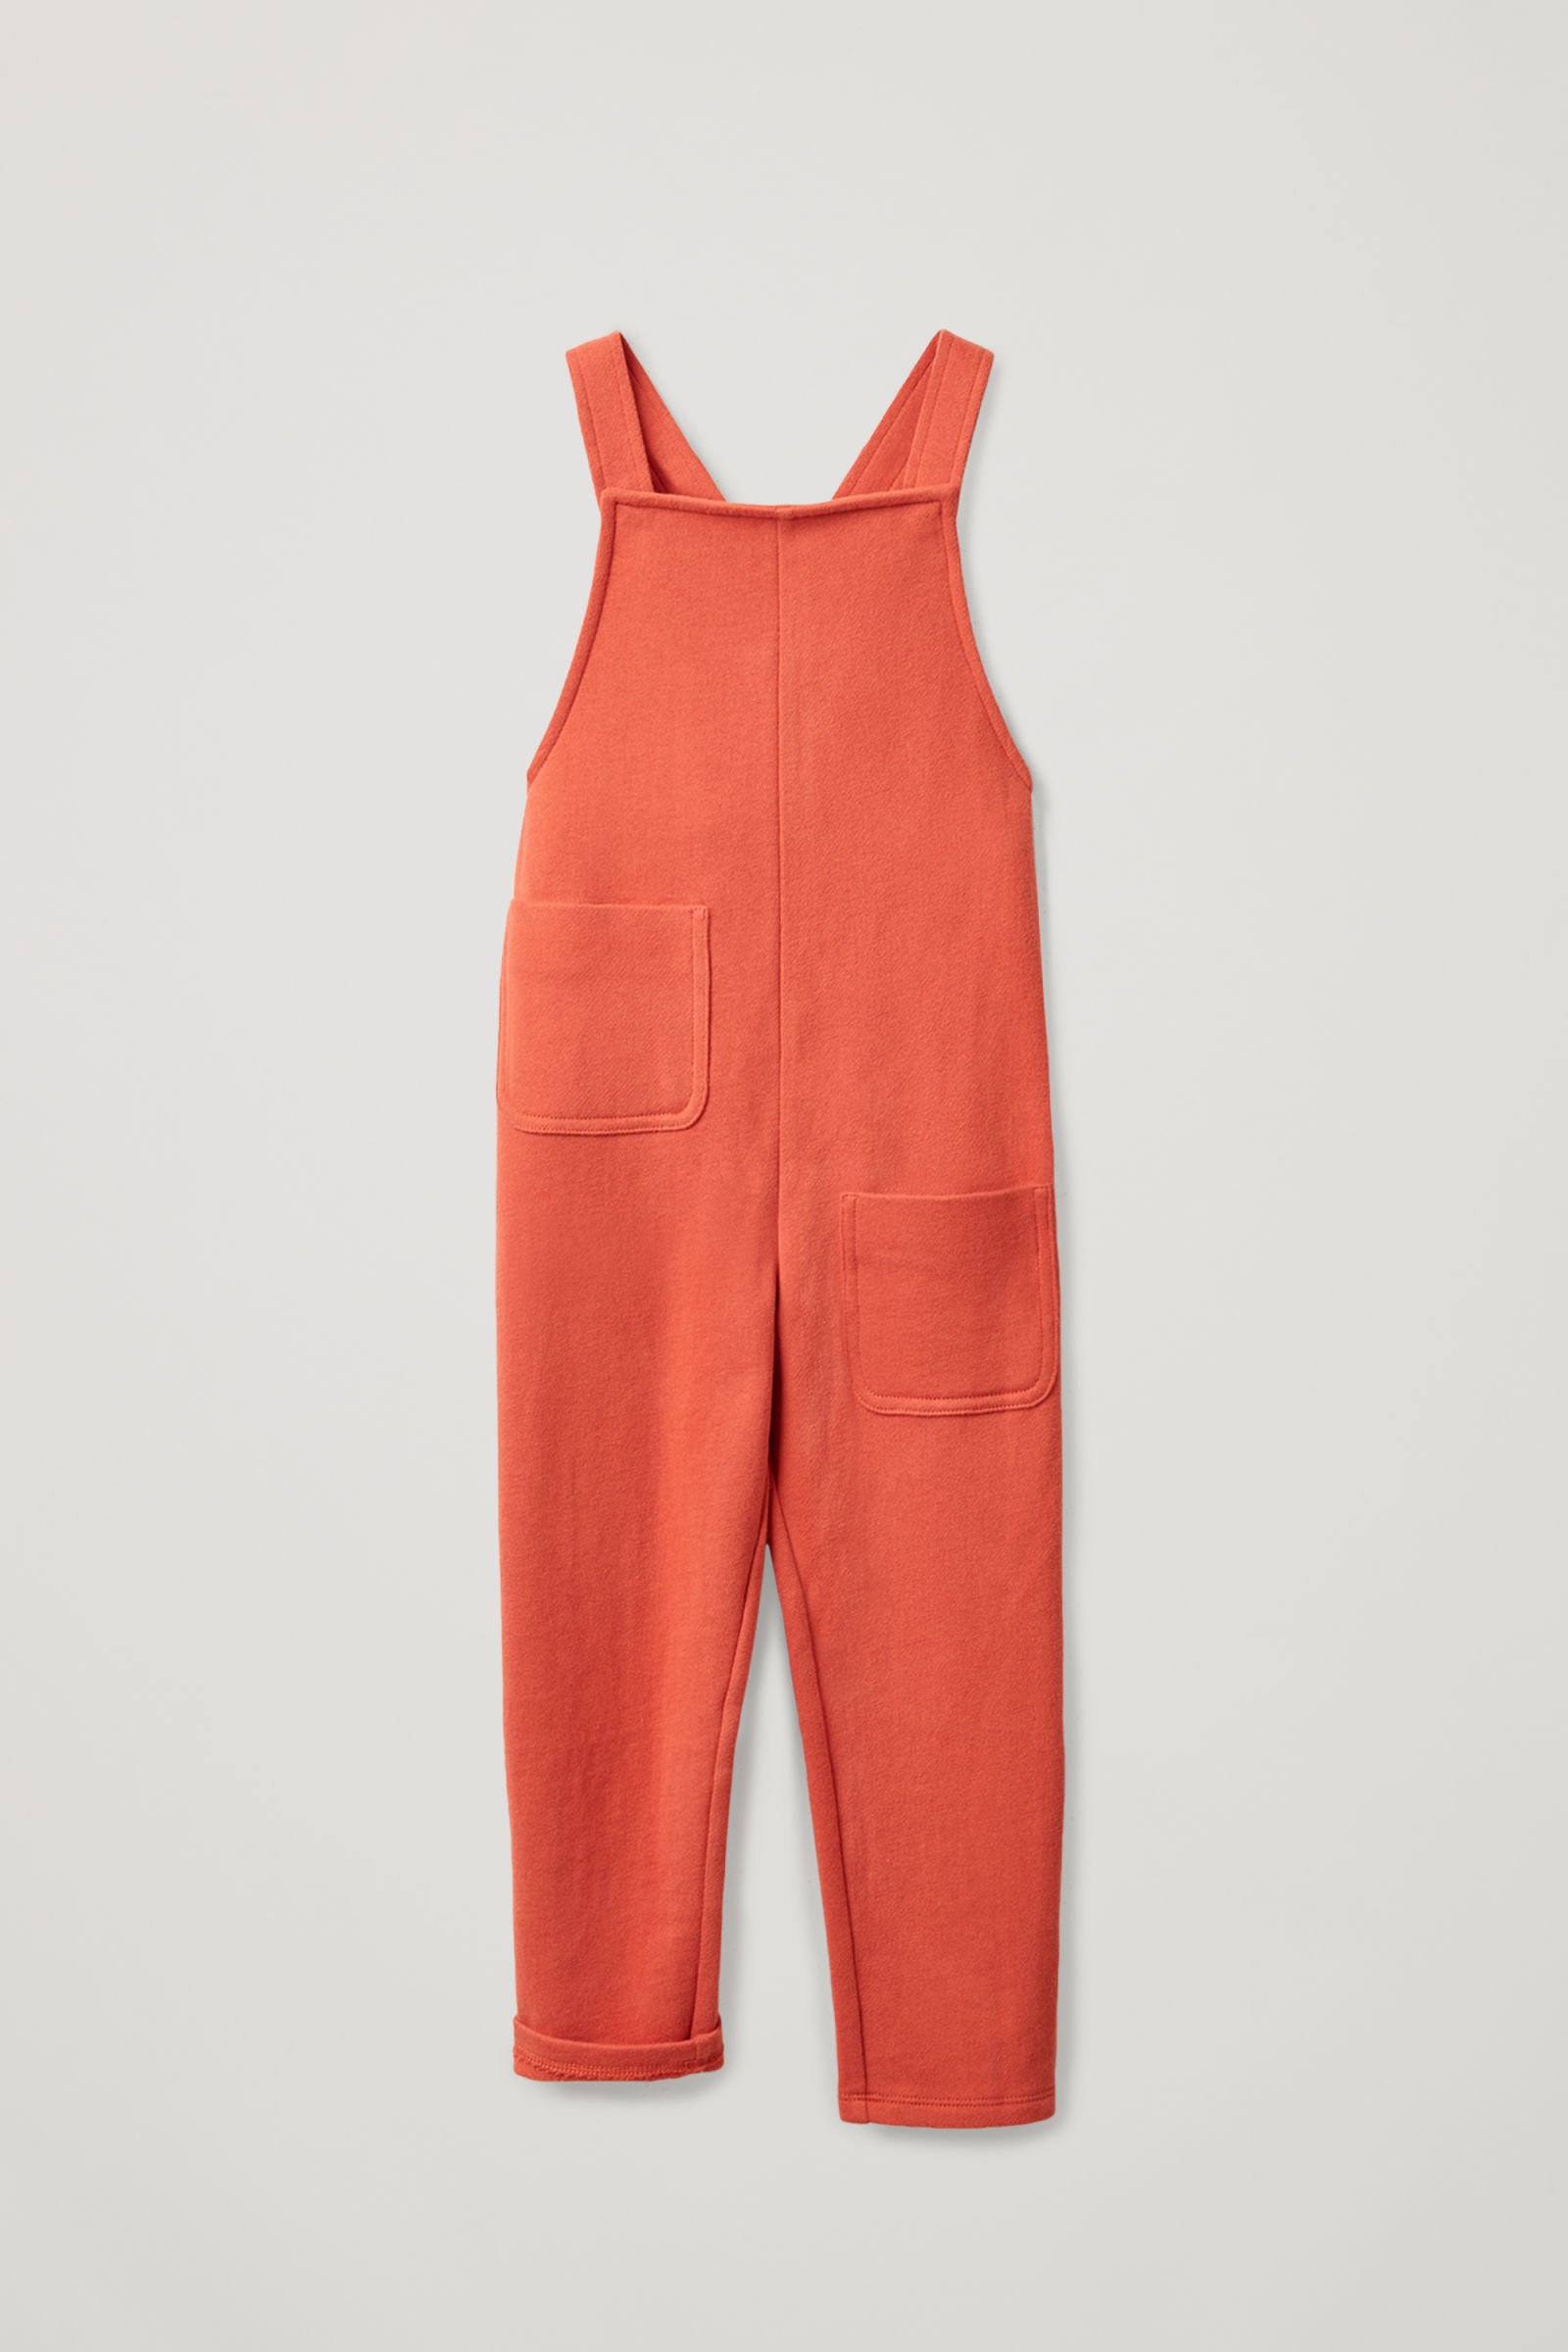 COS Cotton Jersey Dungarees in terracotta